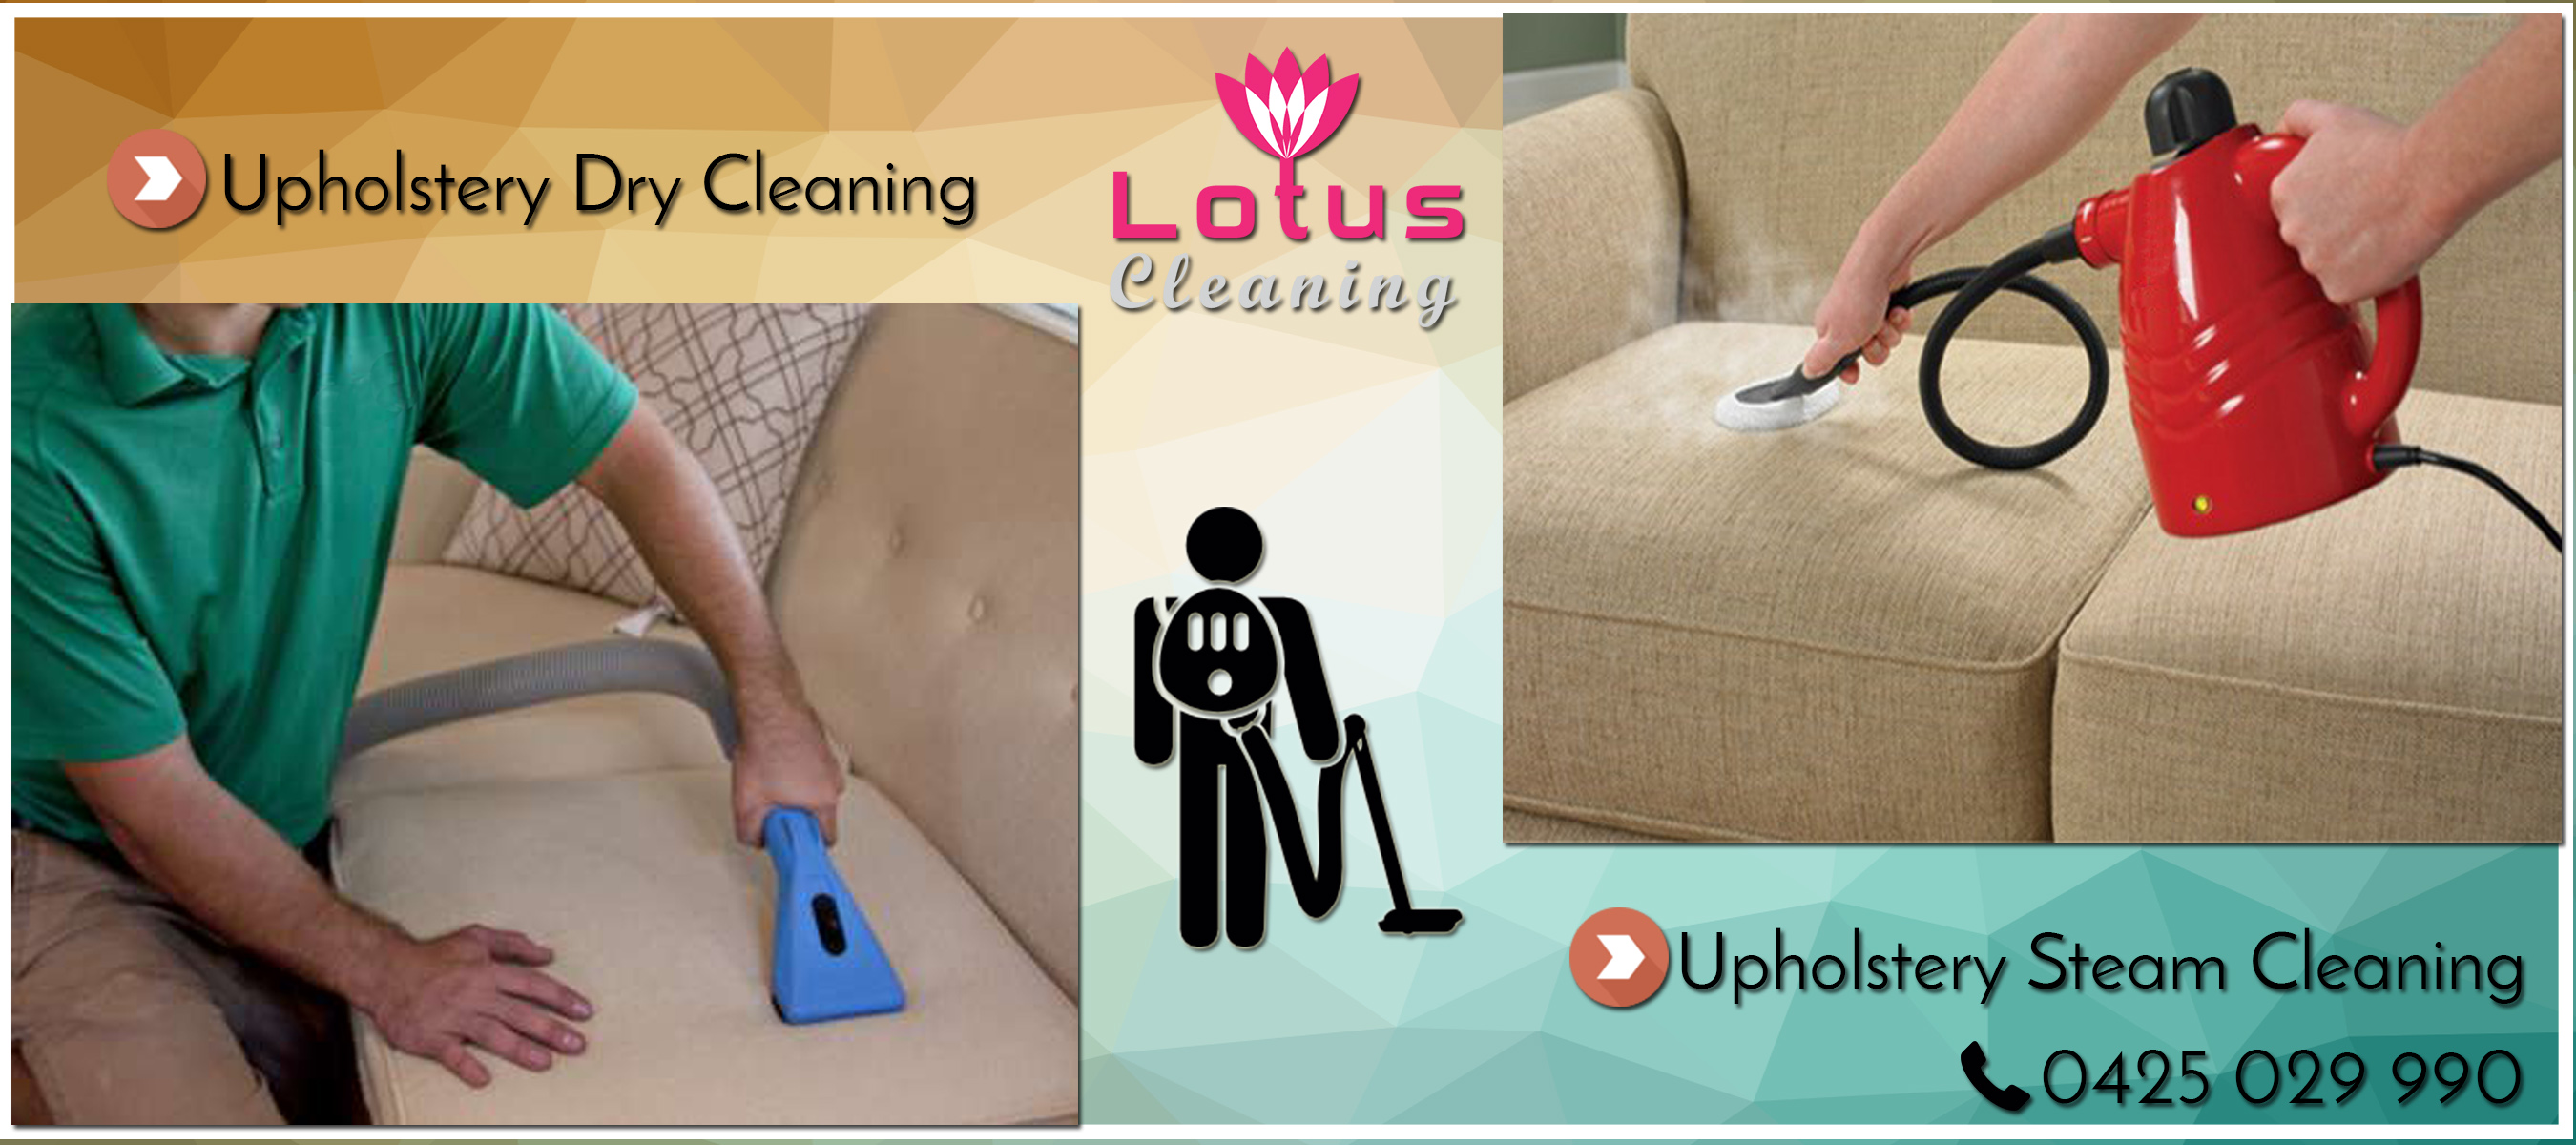 Same Day Upholstery Cleaning St Kilda